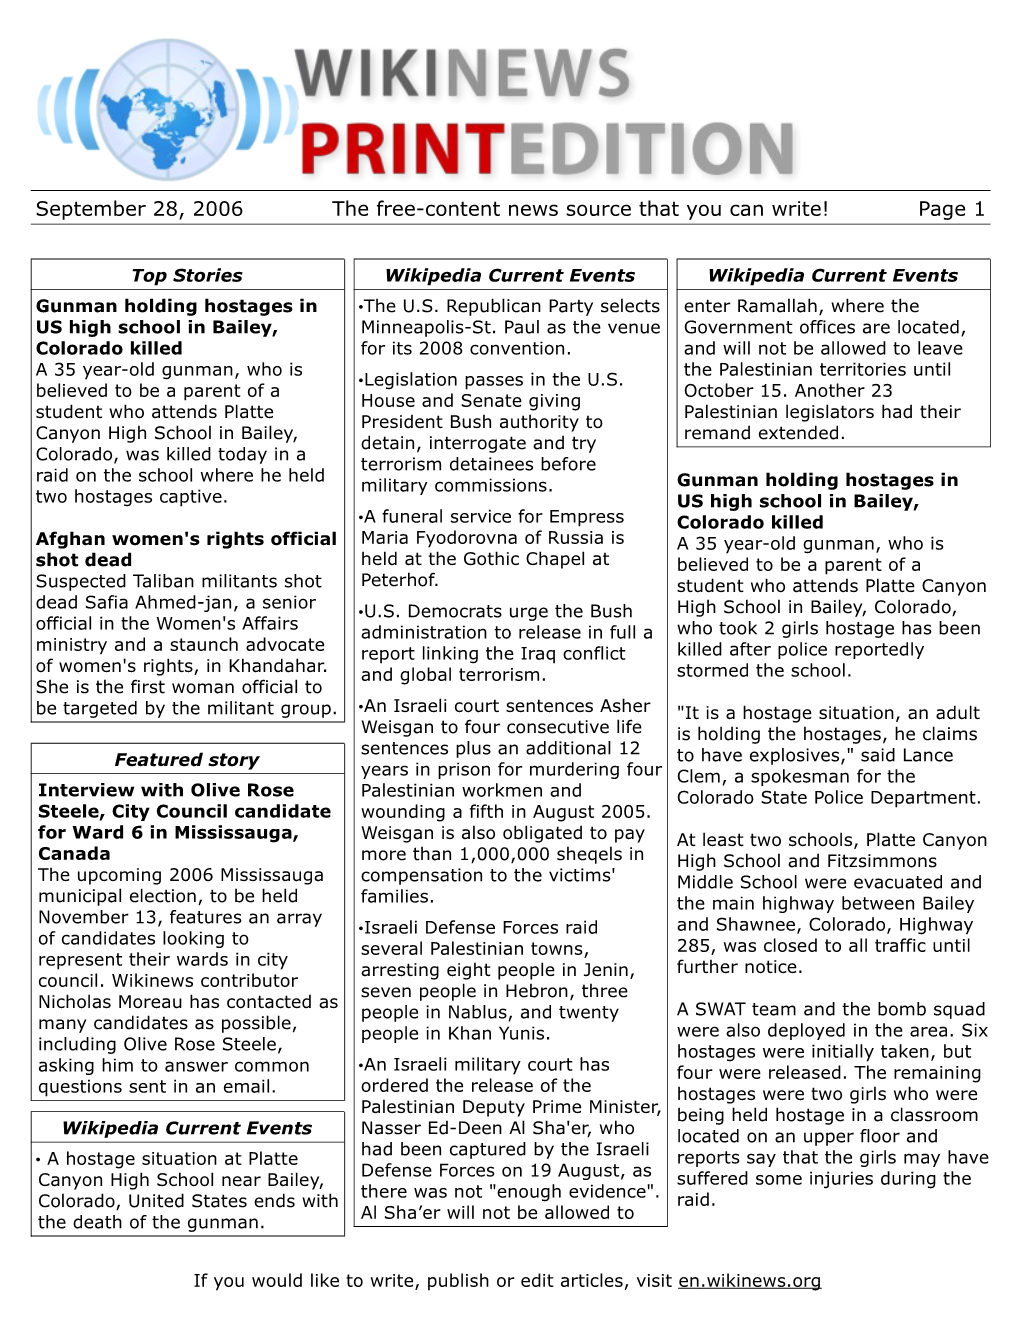 September 28, 2006 the Free-Content News Source That You Can Write! Page 1